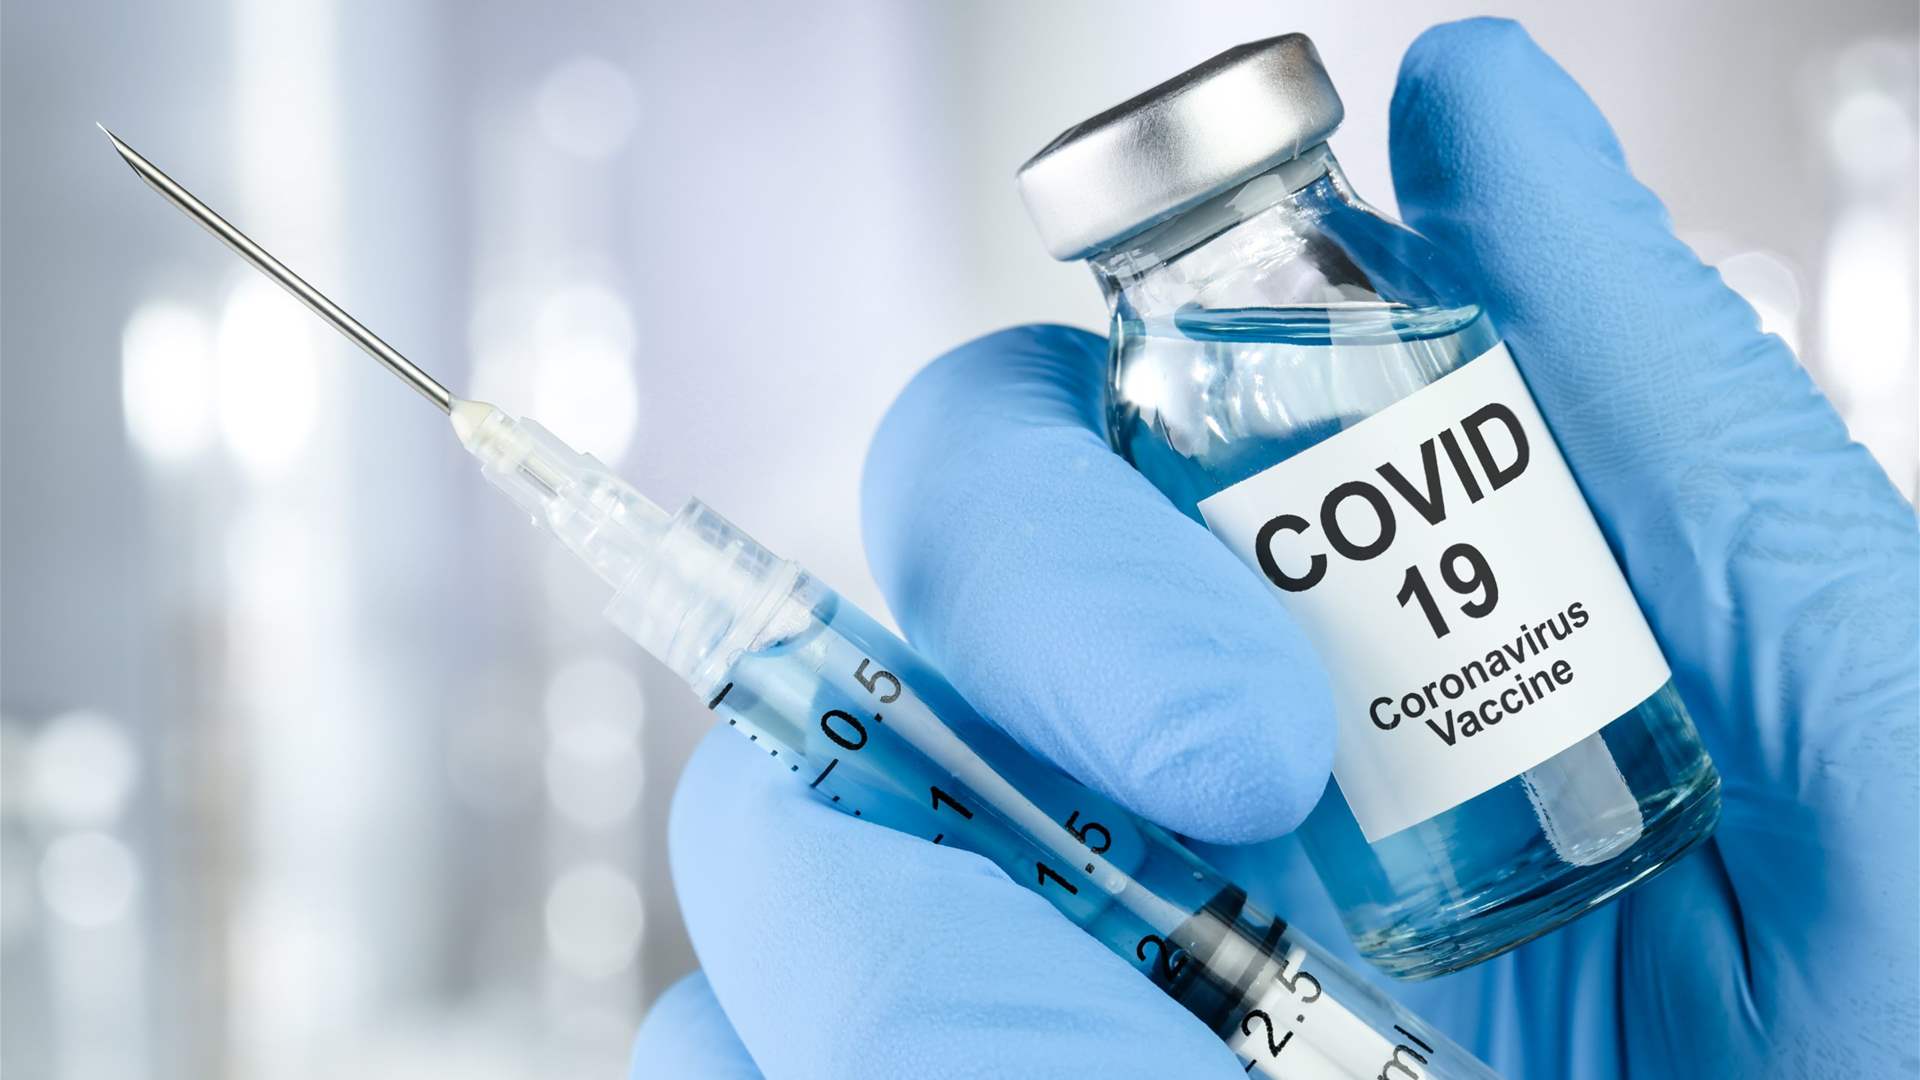 COVID-19 vaccines saved 1.4 Million lives in Europe, says WHO Regional Director